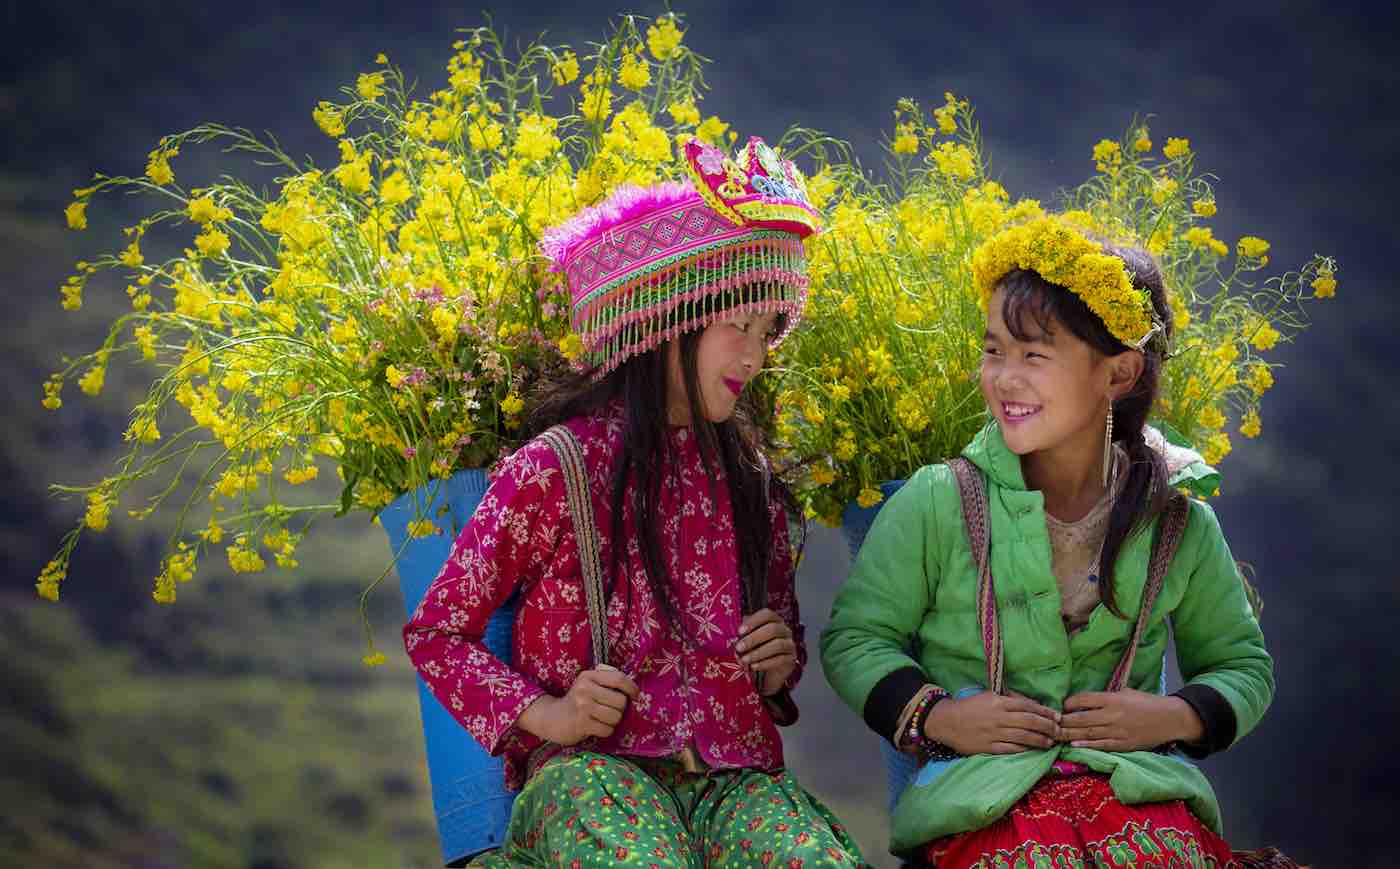 In another heartwarming photo from Vietnam, photographer Nguyen Huu Thong captured two young girls smiling at each other as they sat side by side, carrying on their backs huge baskets filled with yellow flowers. “They had spent the afternoon picking these beautiful flowers that would be used for medicinal purposes in their tribe,” said the photographer. “Their lovely faces and beautiful smiles made me appreciate the moment.”